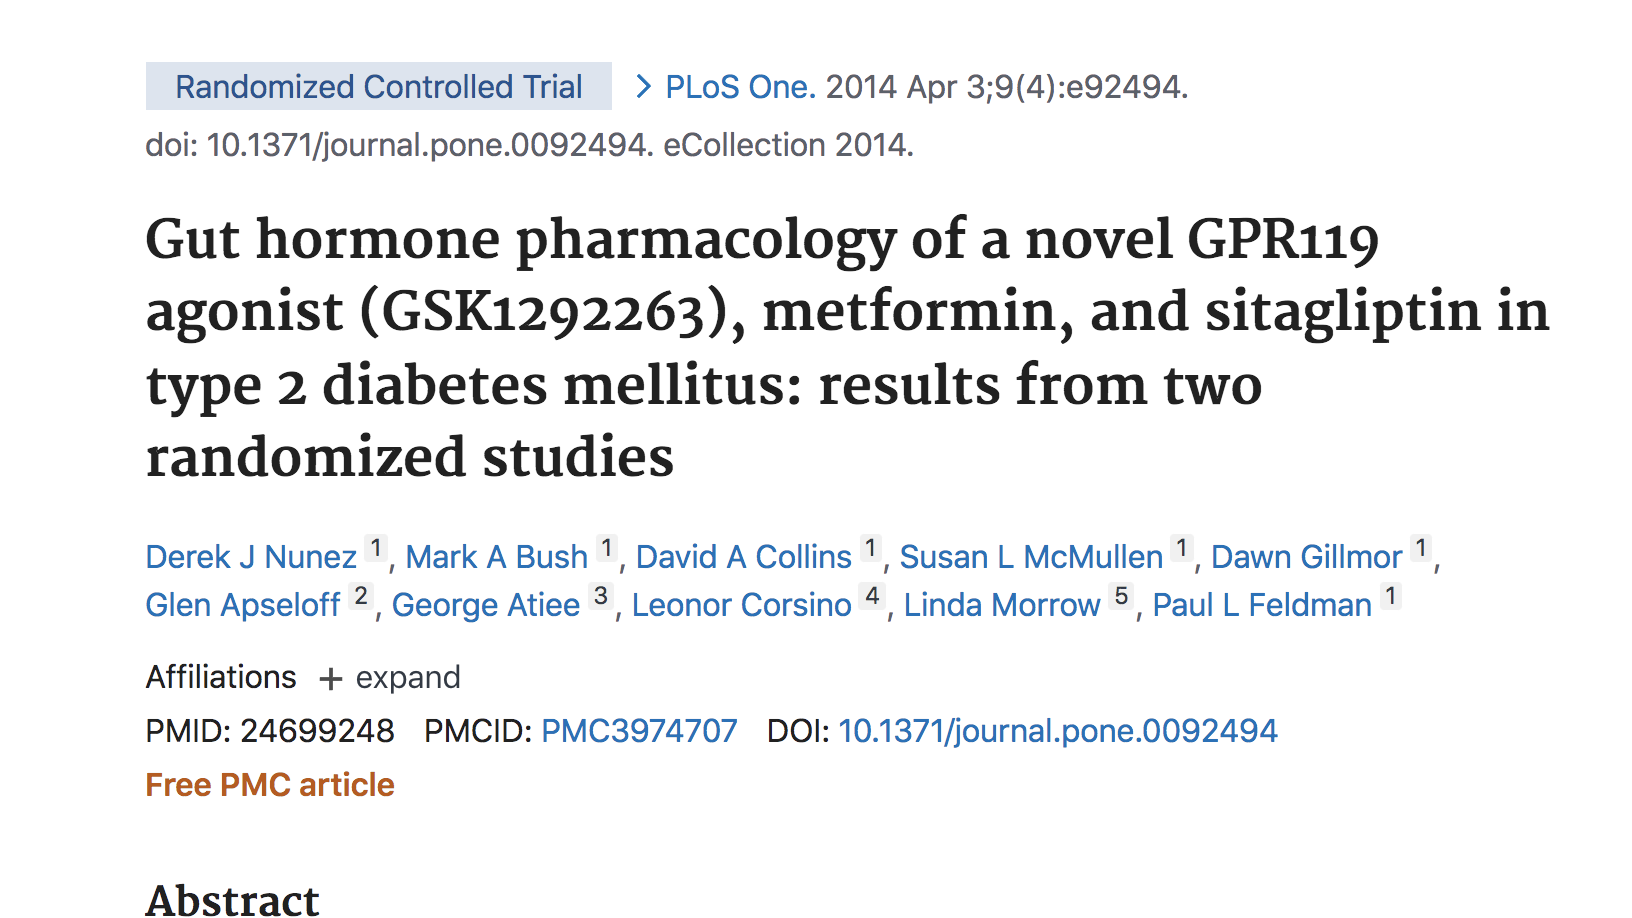 Gut hormone pharmacology of a novel GPR119 agonist (GSK1292263), metformin, and sitagliptin in type 2 diabetes mellitus: results from two randomized studies thumbnail